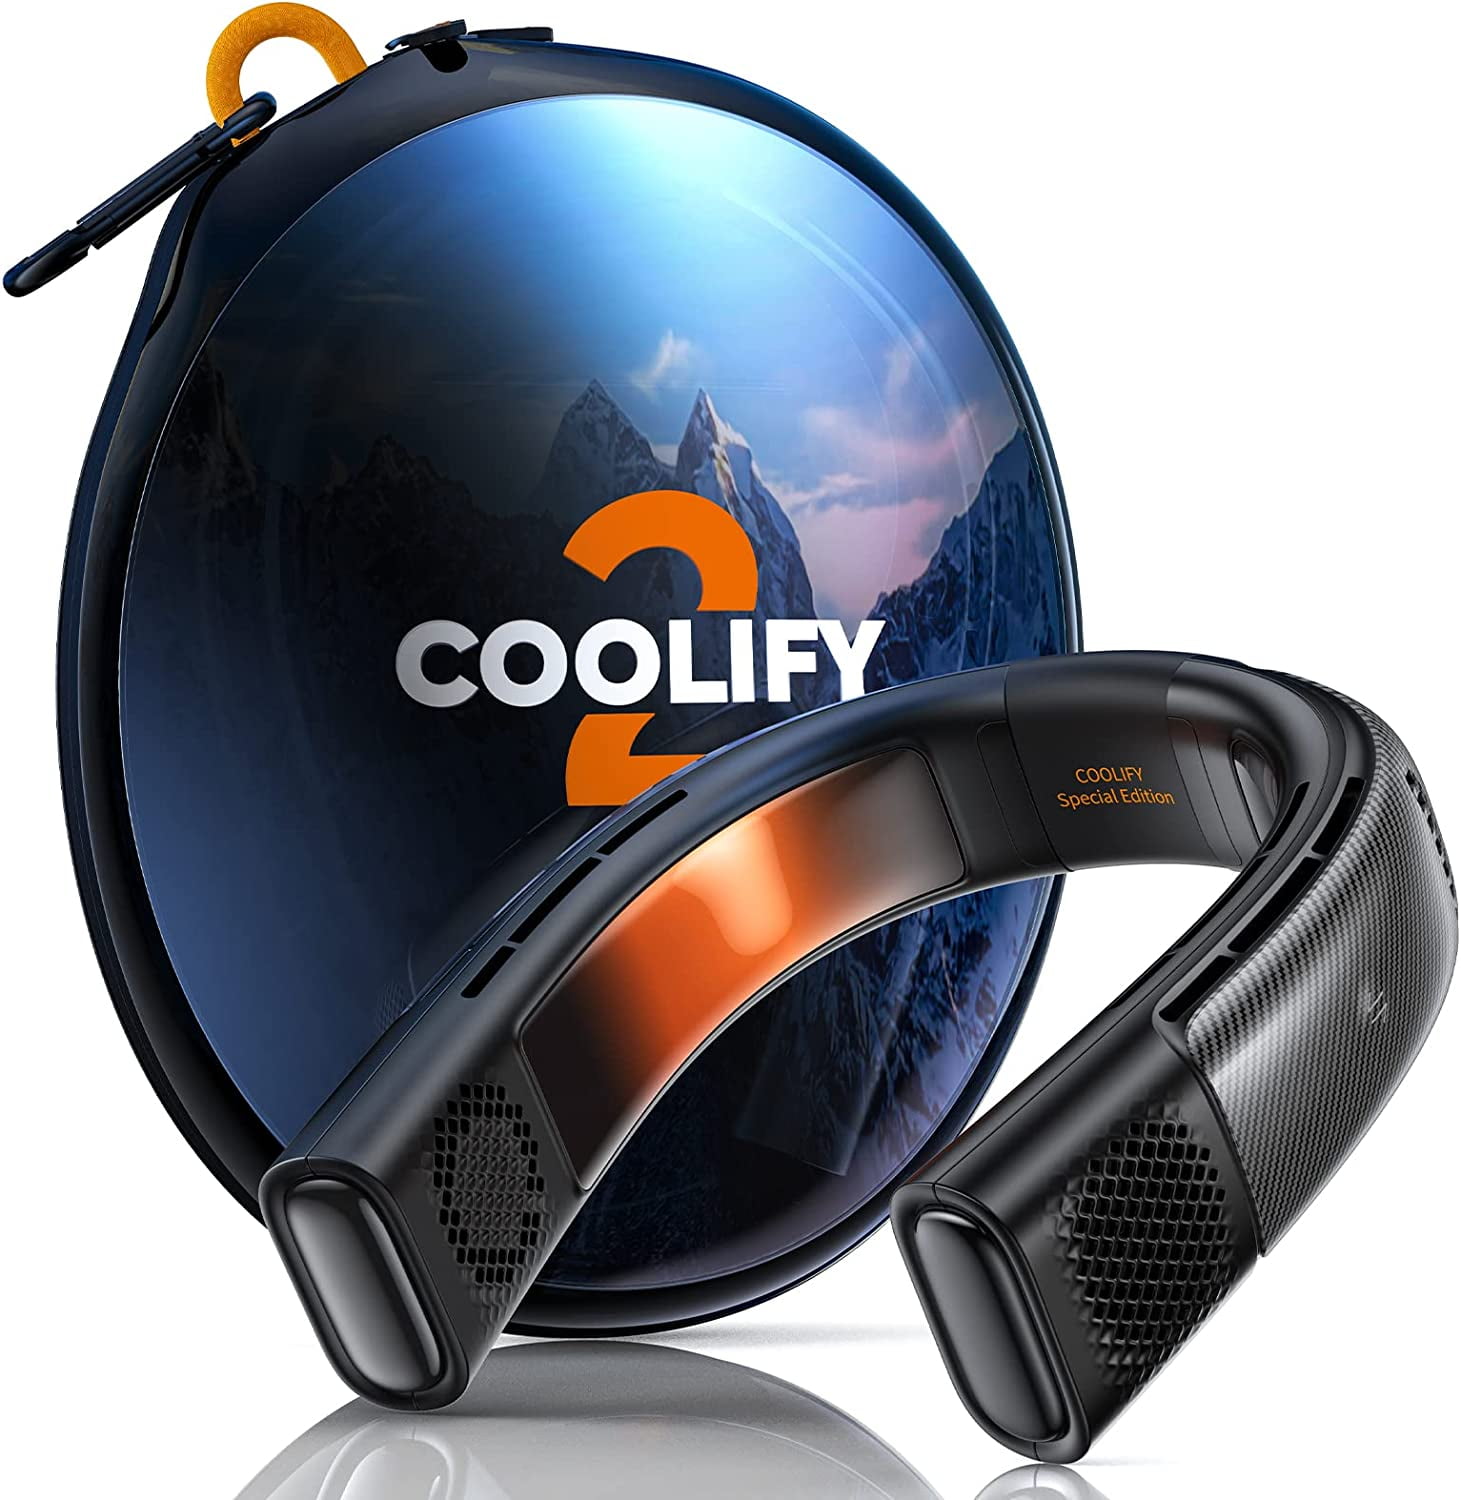 Coolify 2 review